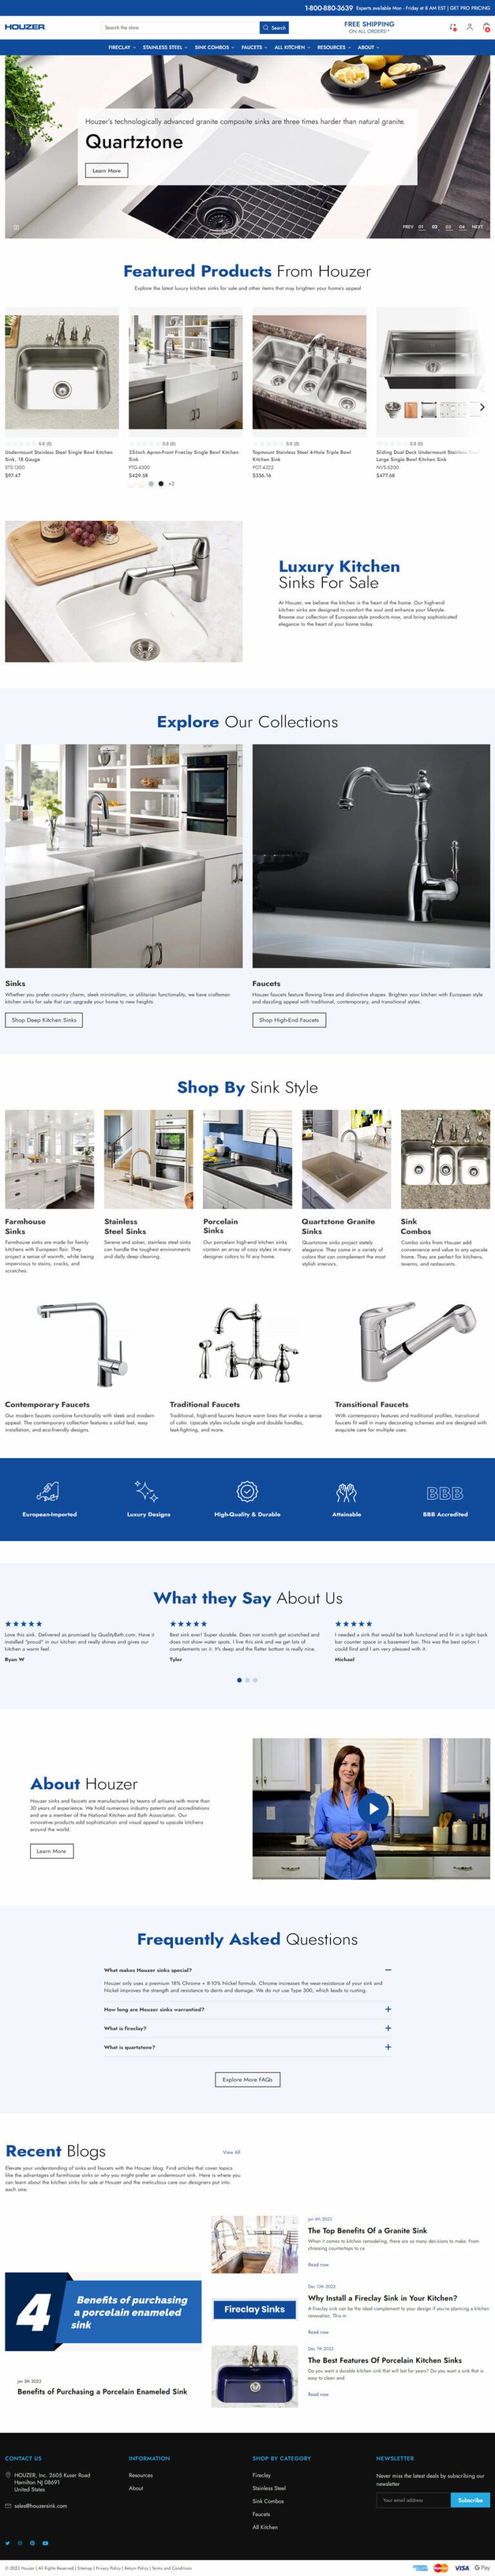 Houzer Home Page showcasing Featured Products, SInks and Faucets